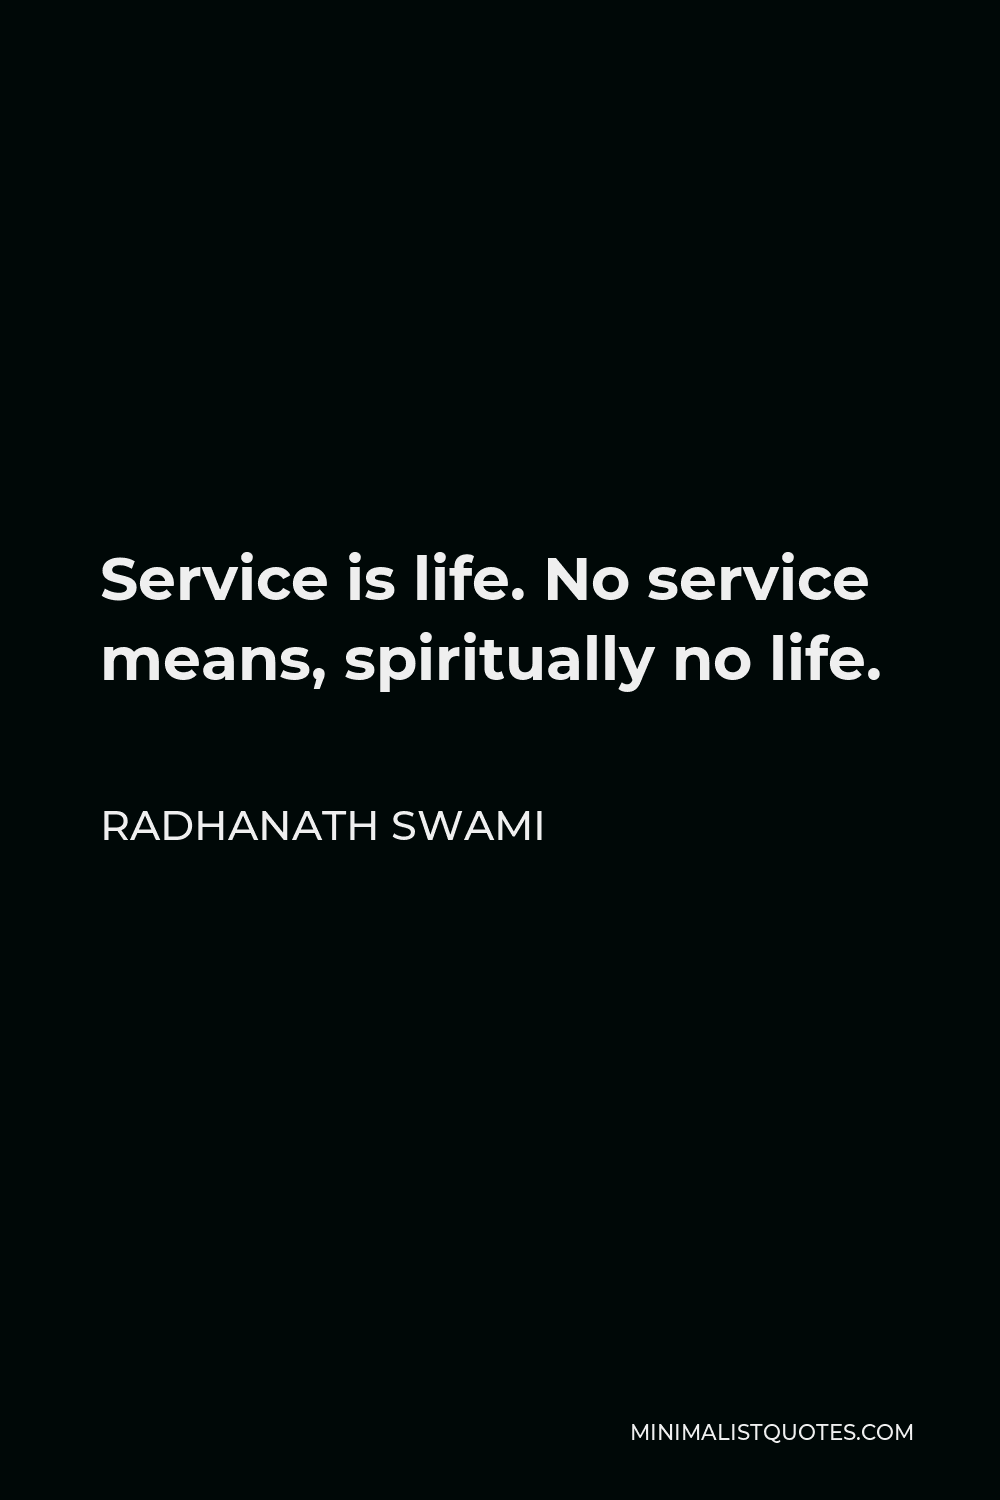 Radhanath Swami Quote - Service is life. No service means, spiritually no life.